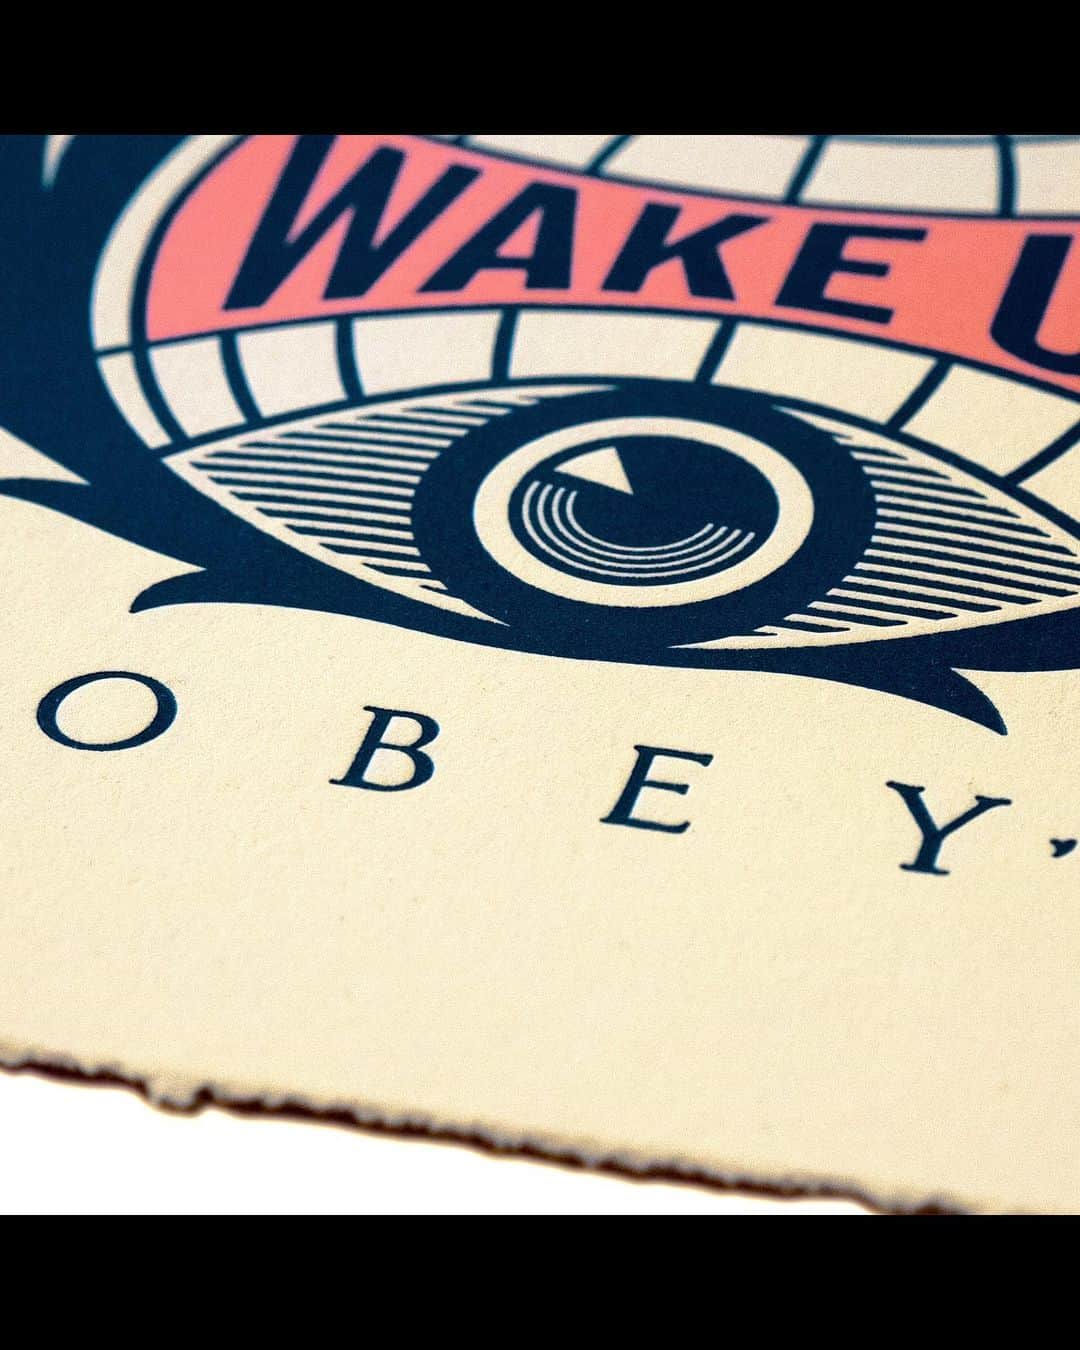 Shepard Faireyさんのインスタグラム写真 - (Shepard FaireyInstagram)「WAKE UP EARTH LETTERPRESS AVAILABLE THURSDAY, AUGUST 6TH!⁠⠀ ⠀⠀⠀⠀⠀⠀⠀⠀⠀⁣⁠⠀ This Wake Up Earth letterpress is an urge for us all to be alert, conscious, and analytical. Disinformation, division, and apathy have led to the weakening of pillars of our democracy, an ineffective response to Covid-19, and a lack of meaningful action on environmental destruction and climate change. We accomplish amazing things when we unite and focus on constructive goals, planting seeds, and nurturing them together until they bloom. There are many crucial things going on that demand us to wake up, mobilize, and live with our eyes and minds open! This print applies to many things, but I’ve chosen to donate proceeds to @NRDC_org (Natural Resources Defense Council) to support their work toward legislation that protects the environment for all of our futures. Thanks for caring!⁠⠀ By the way, this letterpress was printed by Aardvark Letterpress (@aardvarkletterpress) with whom I just completed a special letterpress print to commemorate their 50th anniversary as a family-owned LA business… more info about that coming soon!⁠⠀ -Shepard⁠⠀ ⠀⠀⠀⠀⠀⠀⠀⠀⠀⁣⁠⠀ Wake Up Earth. 10 x 13 inches. Letterpress on cream cotton paper with hand-deckled edges. Signed by Shepard Fairey. Numbered edition of 500. $65. Proceeds go to @nrdc_org. Obey publishing chop in lower left corner. Available on Thursday, August 6th @ 10 AM PDT at https://store.obeygiant.com/collections/prints. Max order: 1 per customer/household. International customers are responsible for import fees due upon delivery.⁣ Orders may be delayed due to COVID19. ALL SALES FINAL.」8月5日 2時11分 - obeygiant